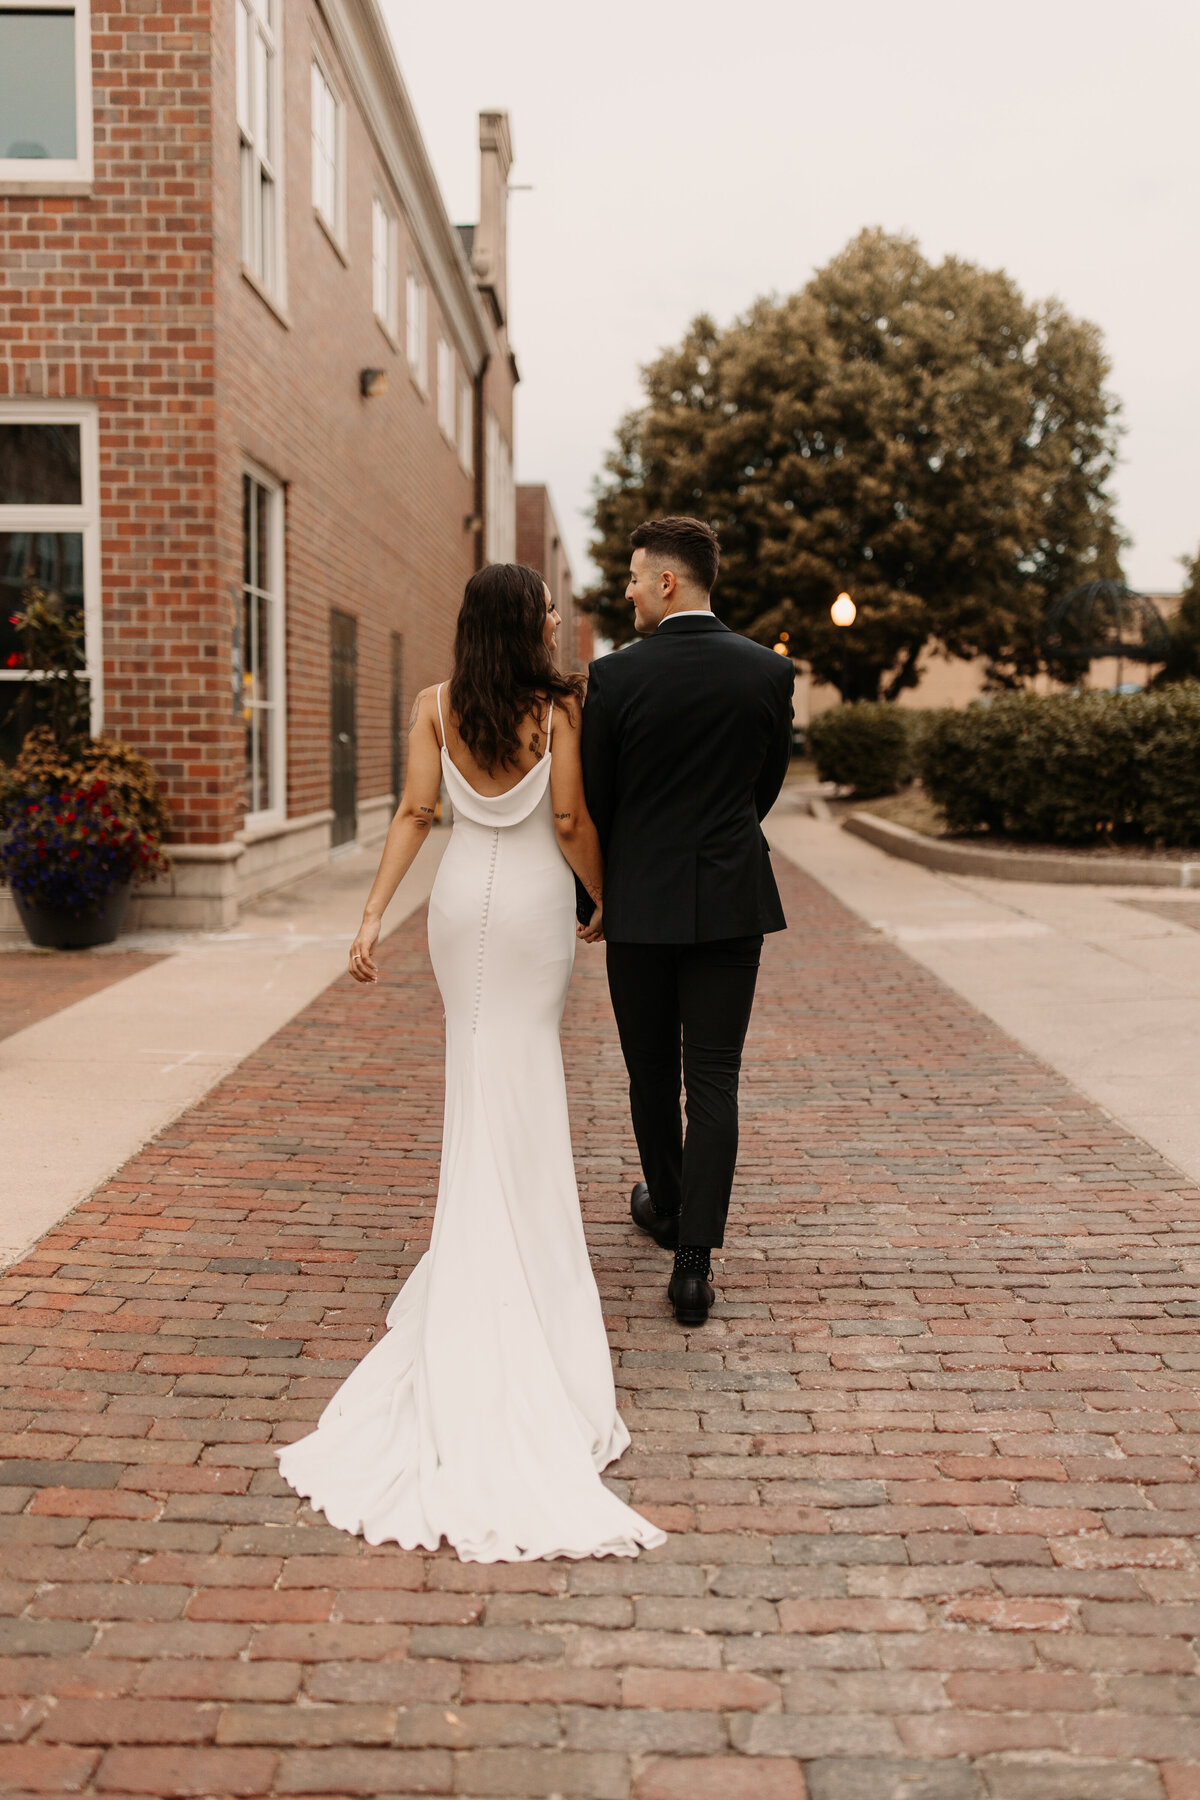 Bride and Groom walking away from the camera surrounded by brick buildings.